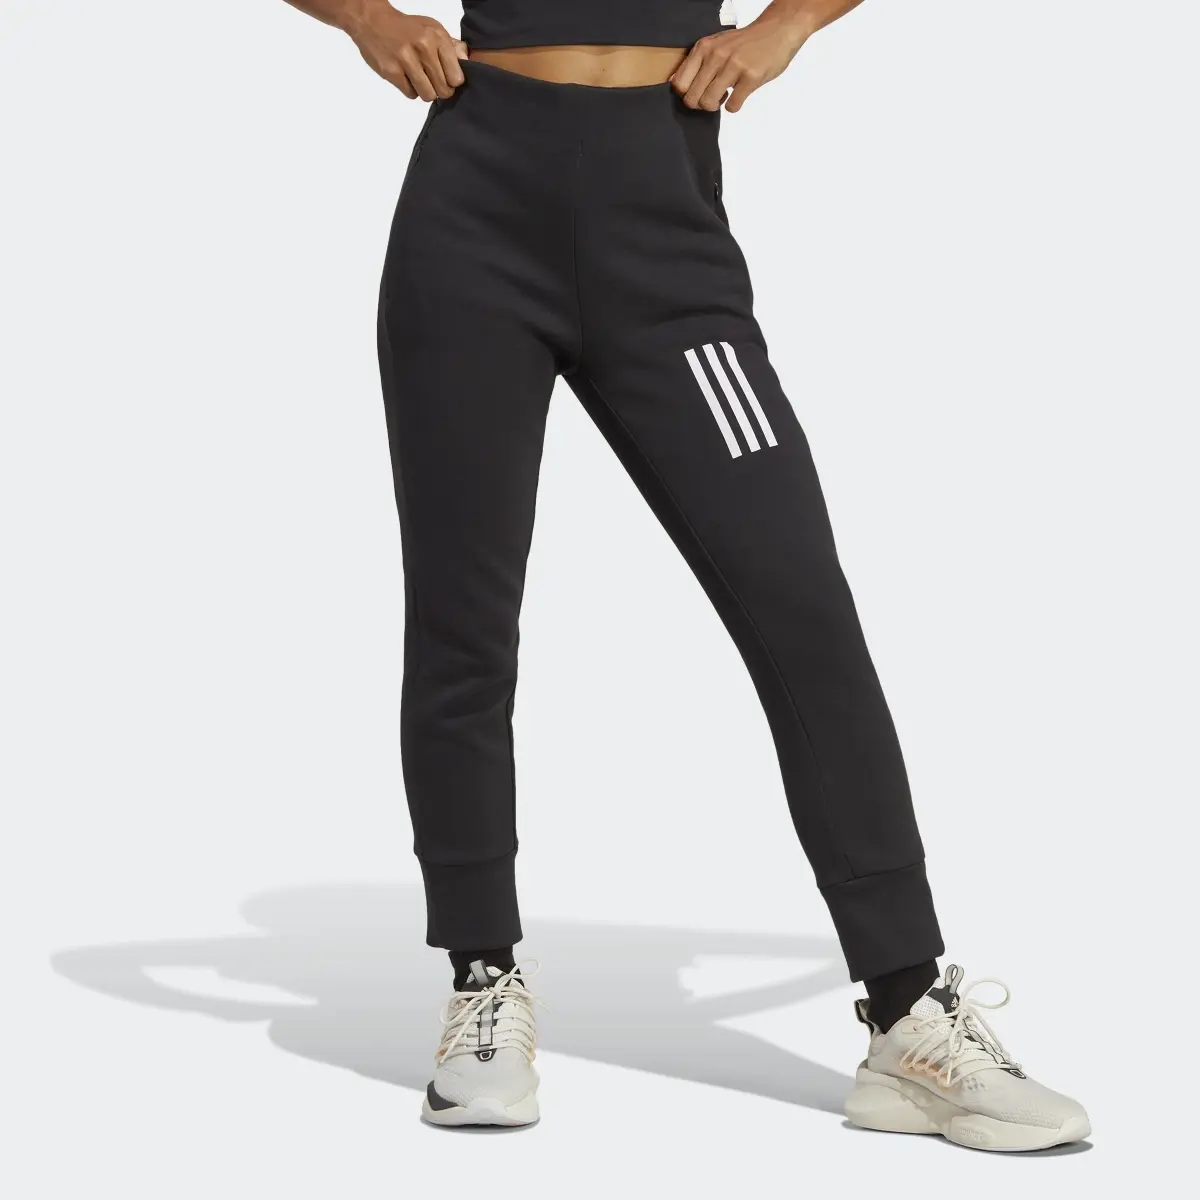 Adidas Mission Victory High-Waist 7/8 Tracksuit Bottoms. 3